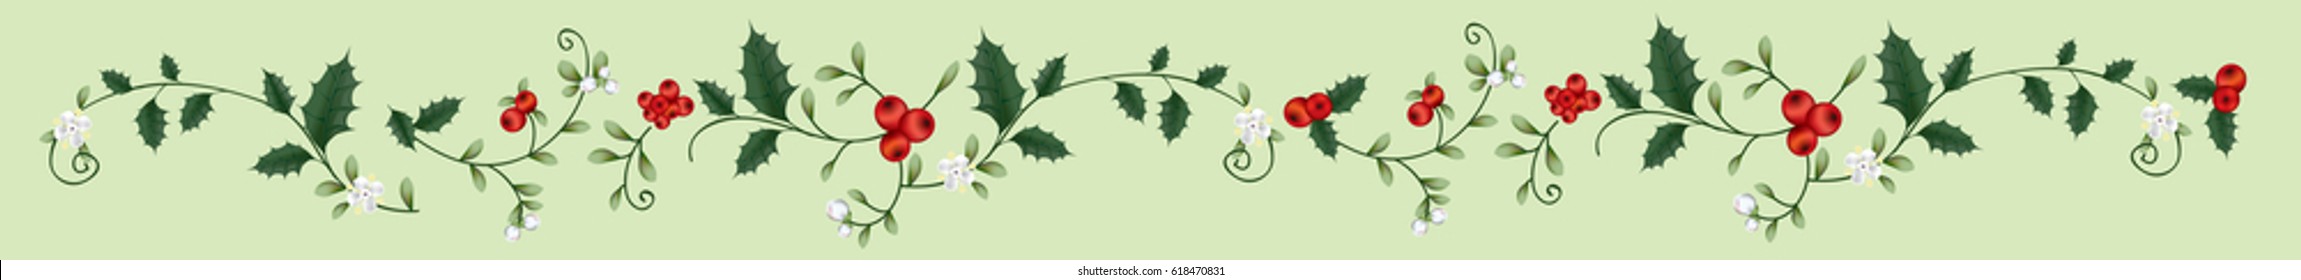 long pattern of flowers, berries and leaves of holly